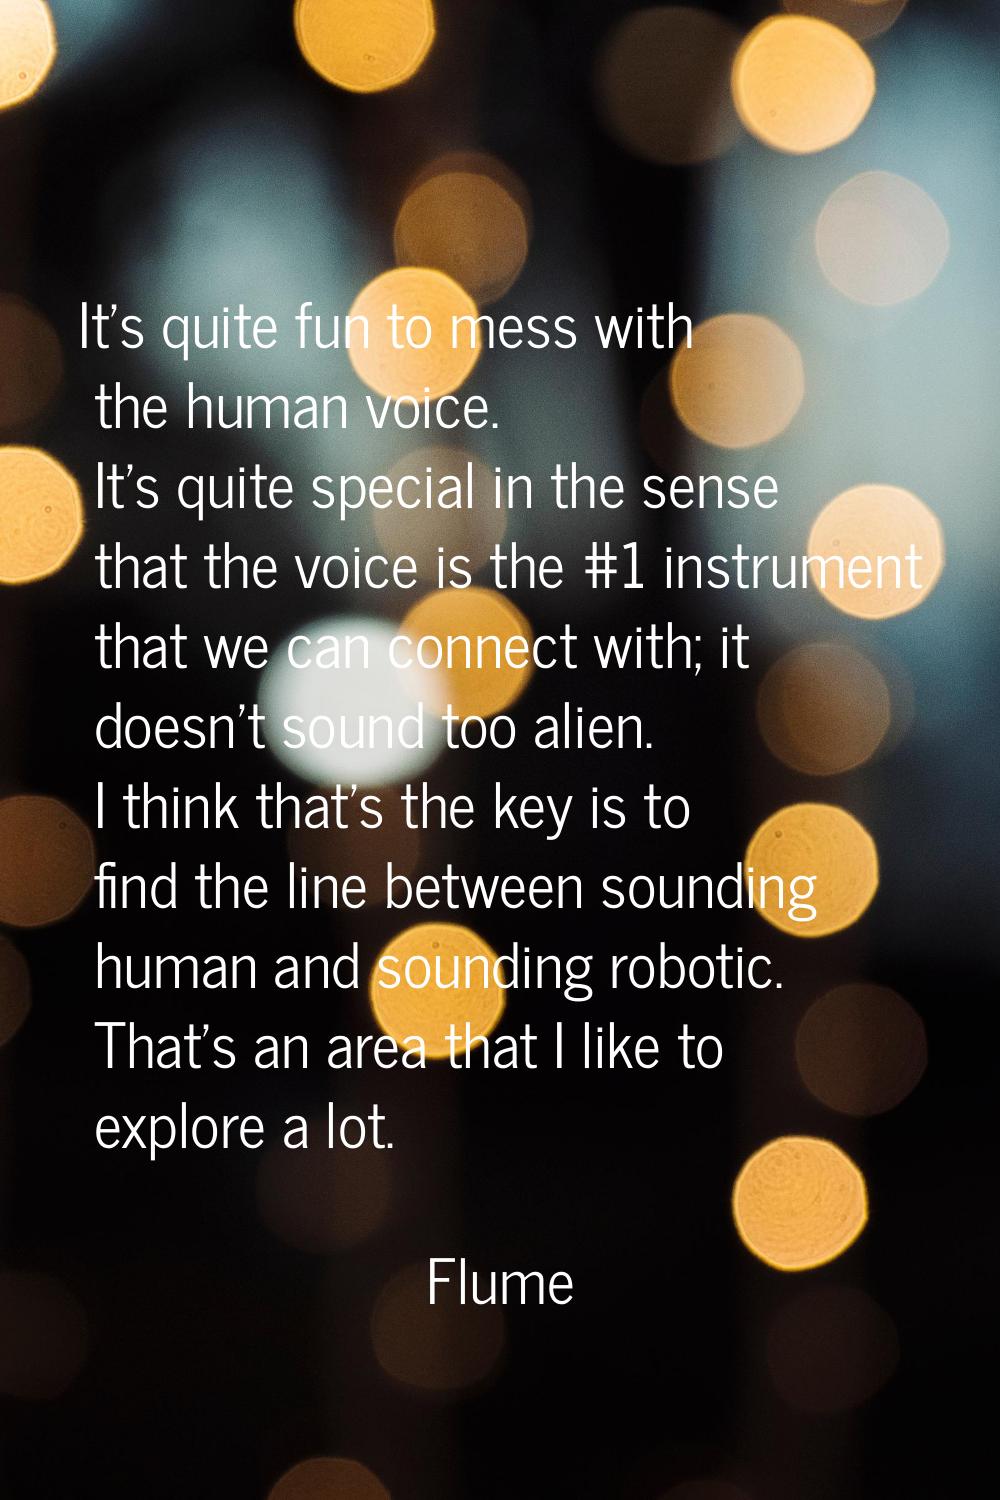 It's quite fun to mess with the human voice. It's quite special in the sense that the voice is the 